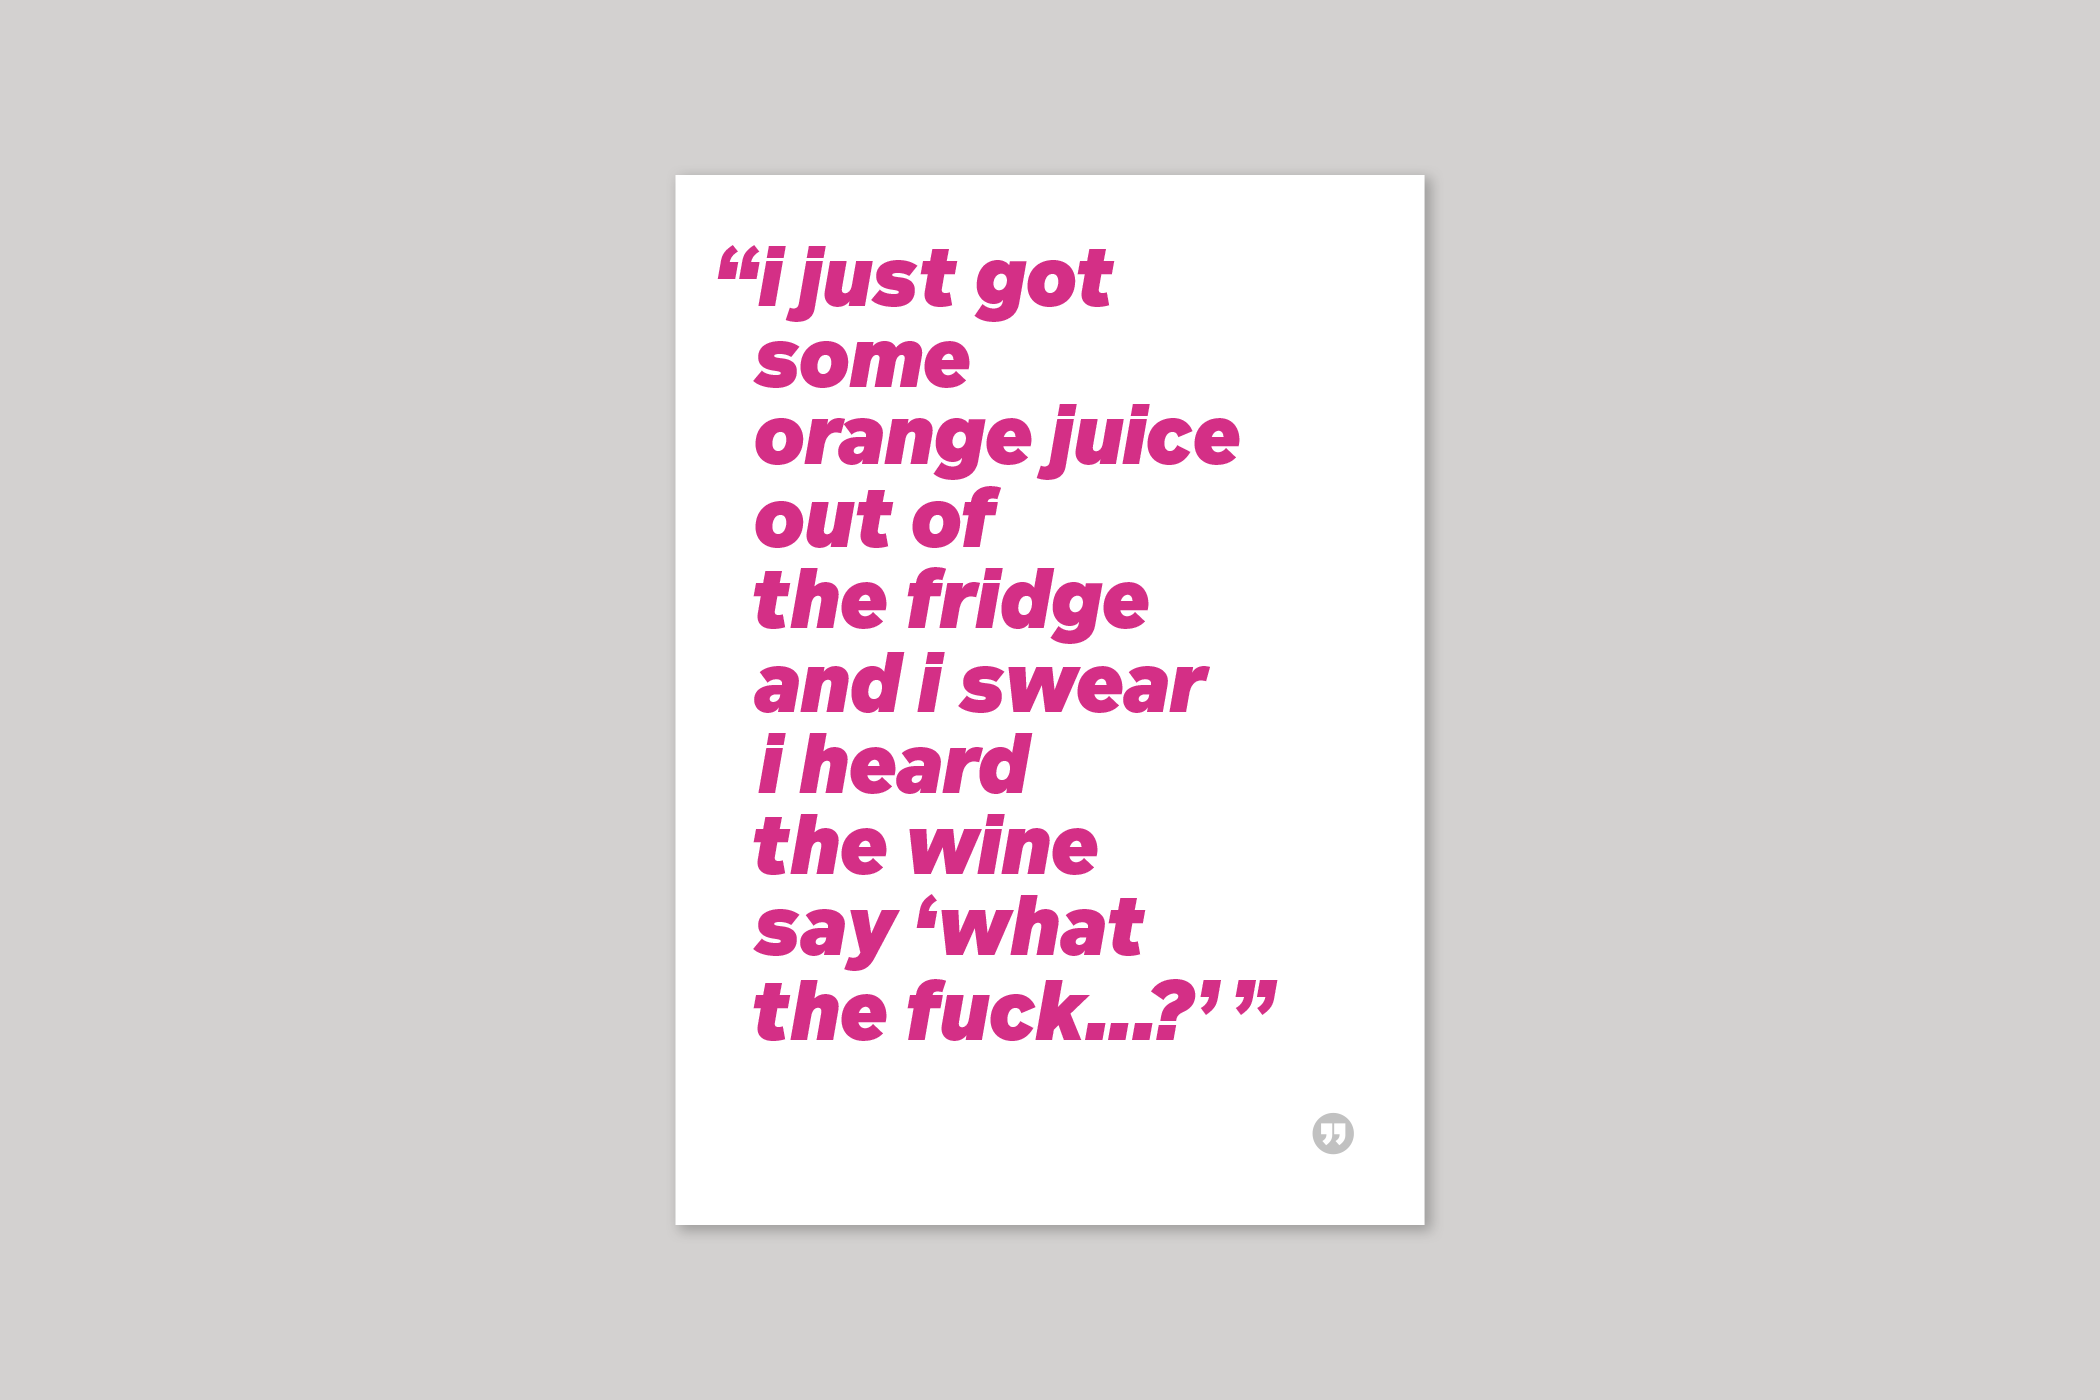 Orange Juice funny quotation from Quotecards range of cards by Icon.